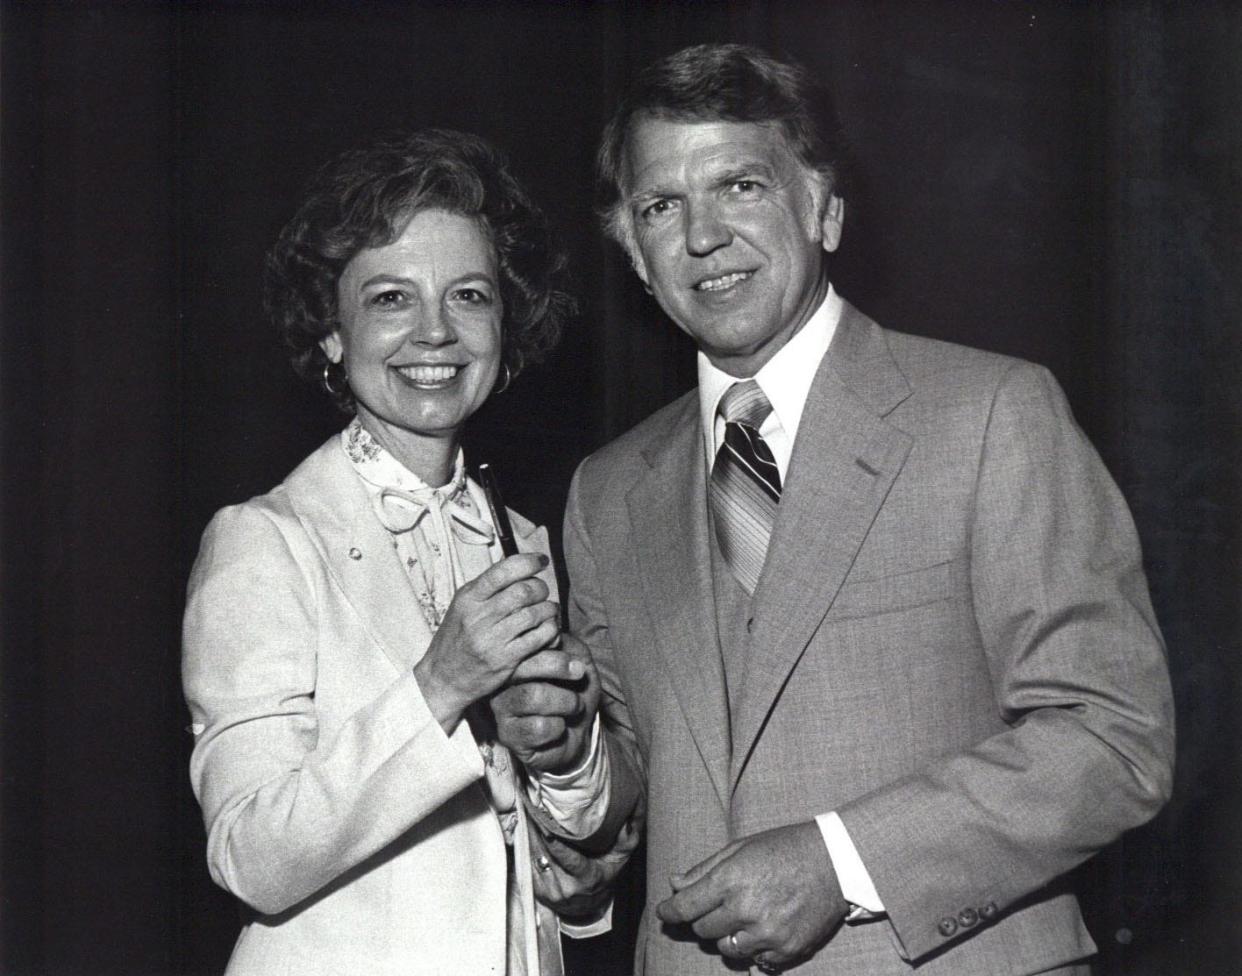 Longtime Oklahoma Arts Council Executive Director Betty Price poses for a photo with one-time Gov. George Nigh in an undated photo.